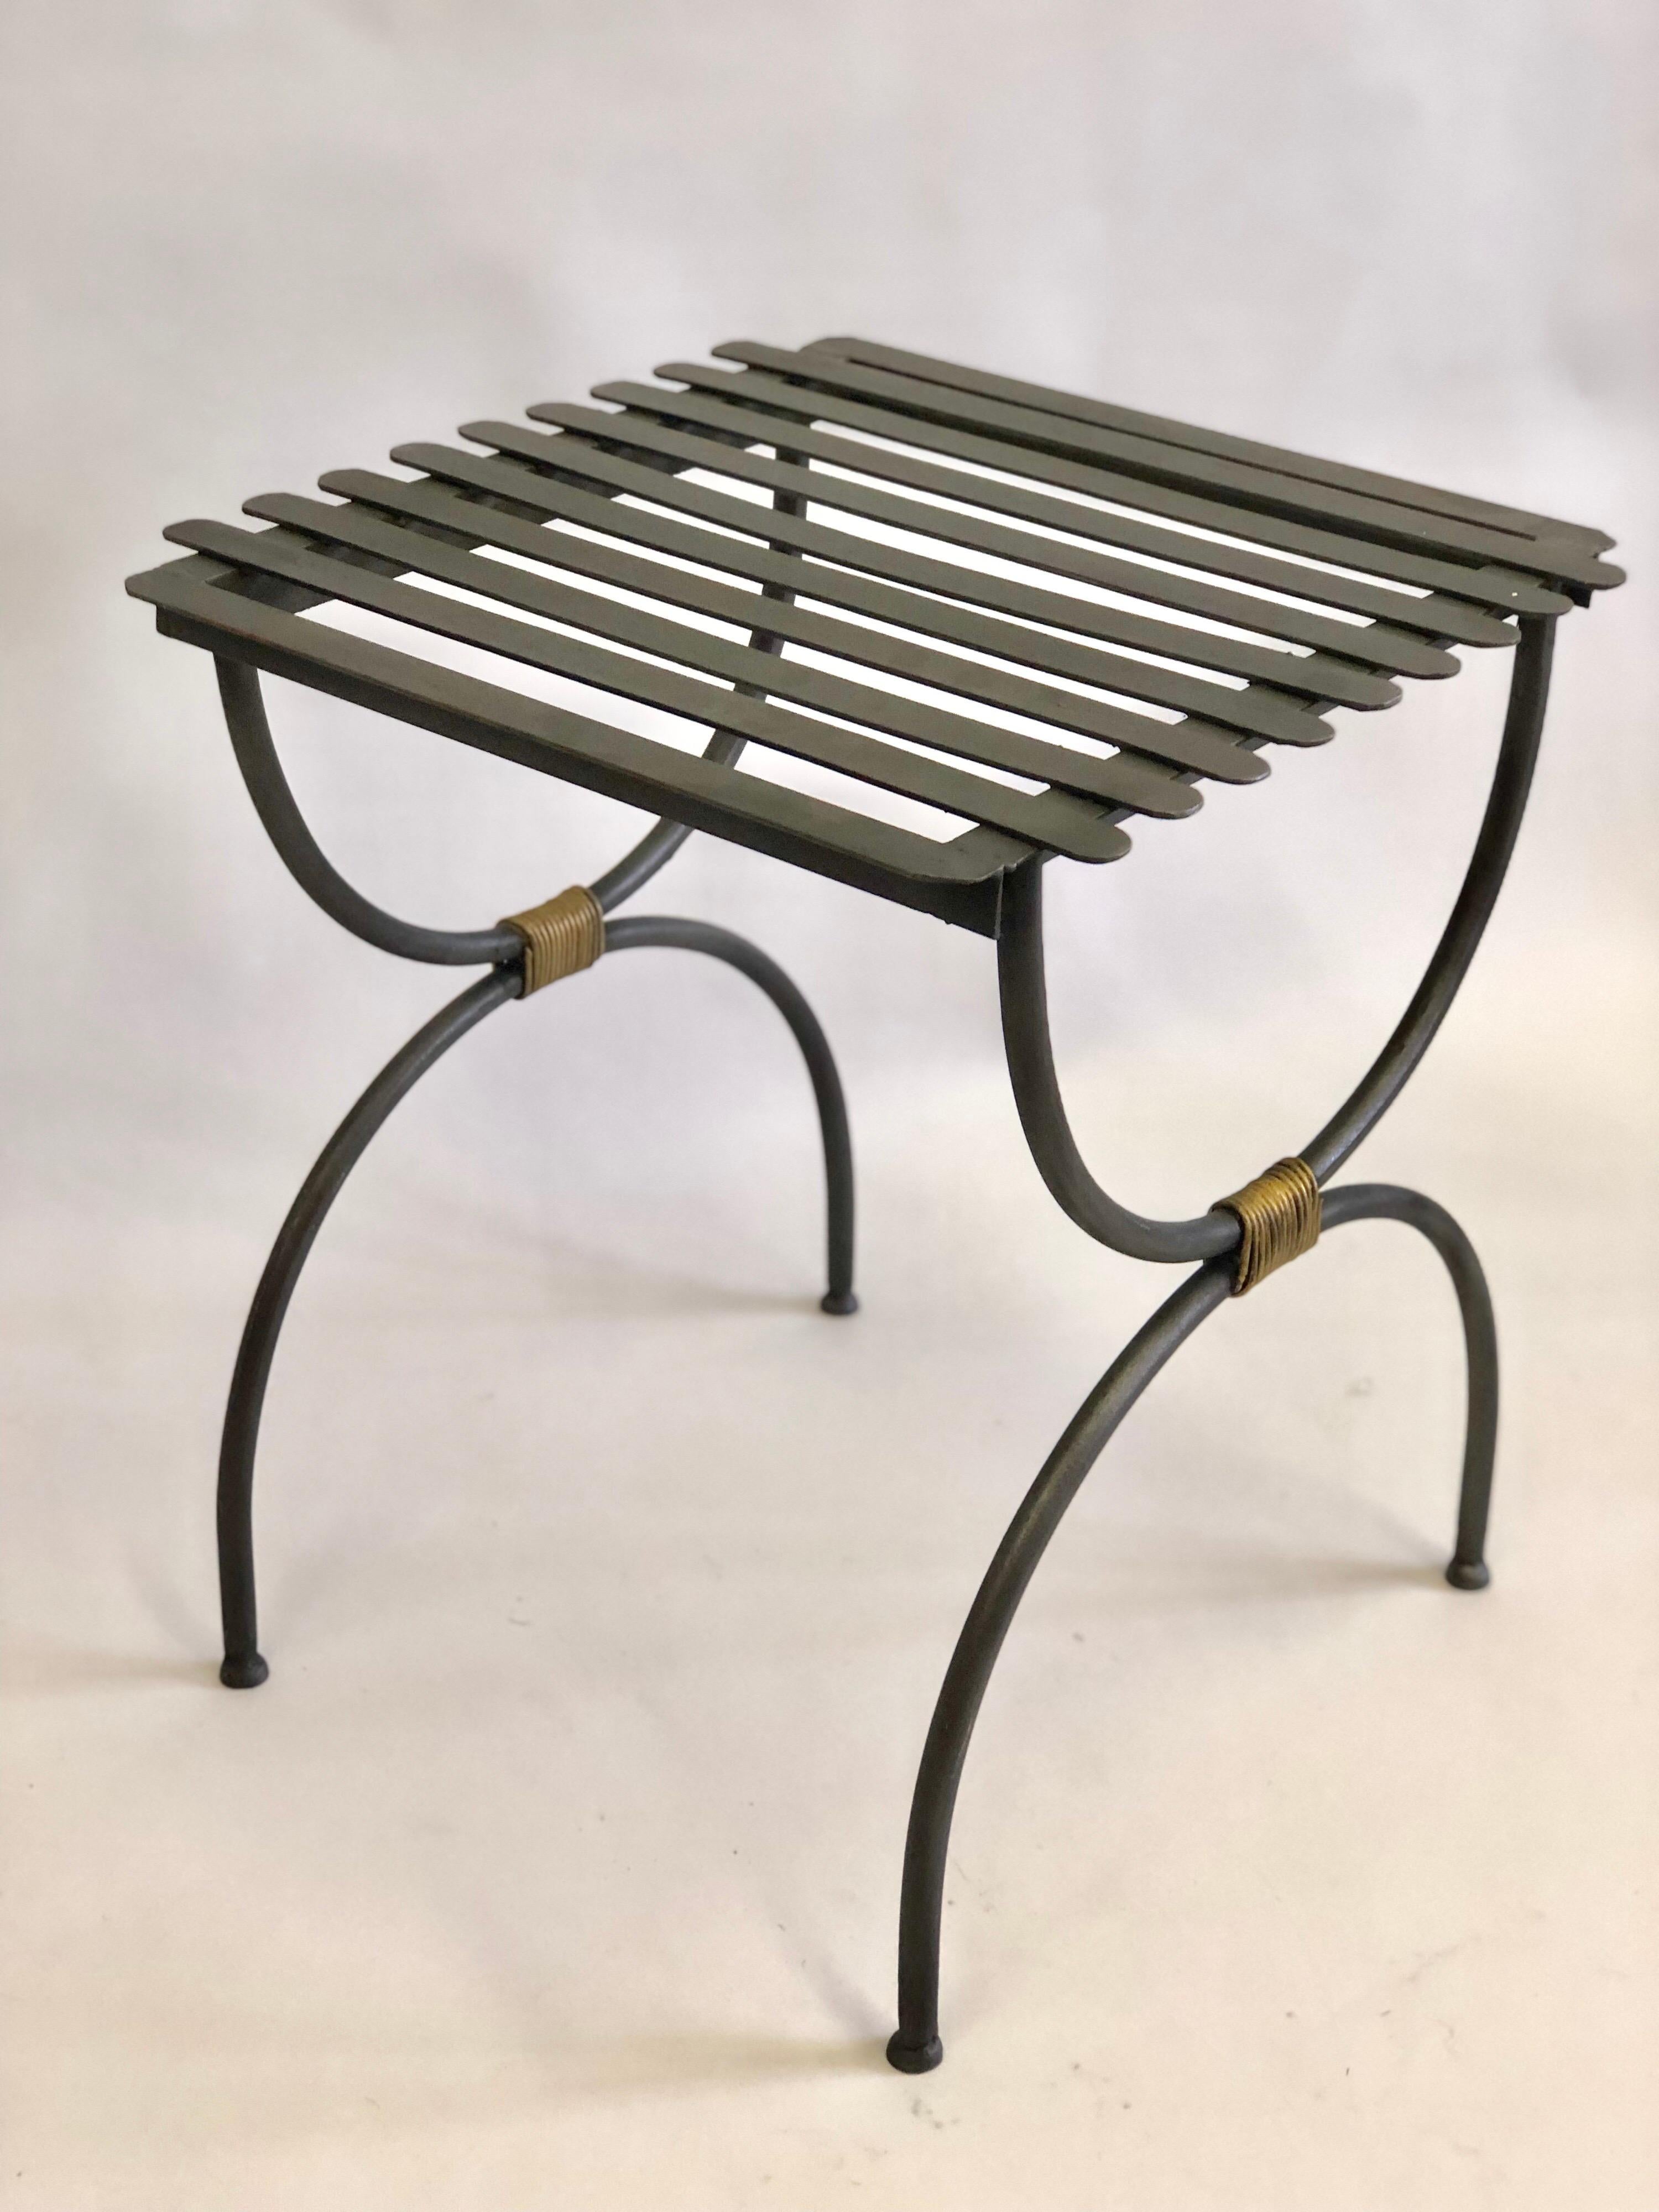 2 Pairs of French X-form iron side tables / luggage racks from the Mid-Century Modern period . The pieces, in matte black patina, are in a sober, pure, curile form (X-Form) with gilt iron wrappings uniting upper and lower halves. The convenient size